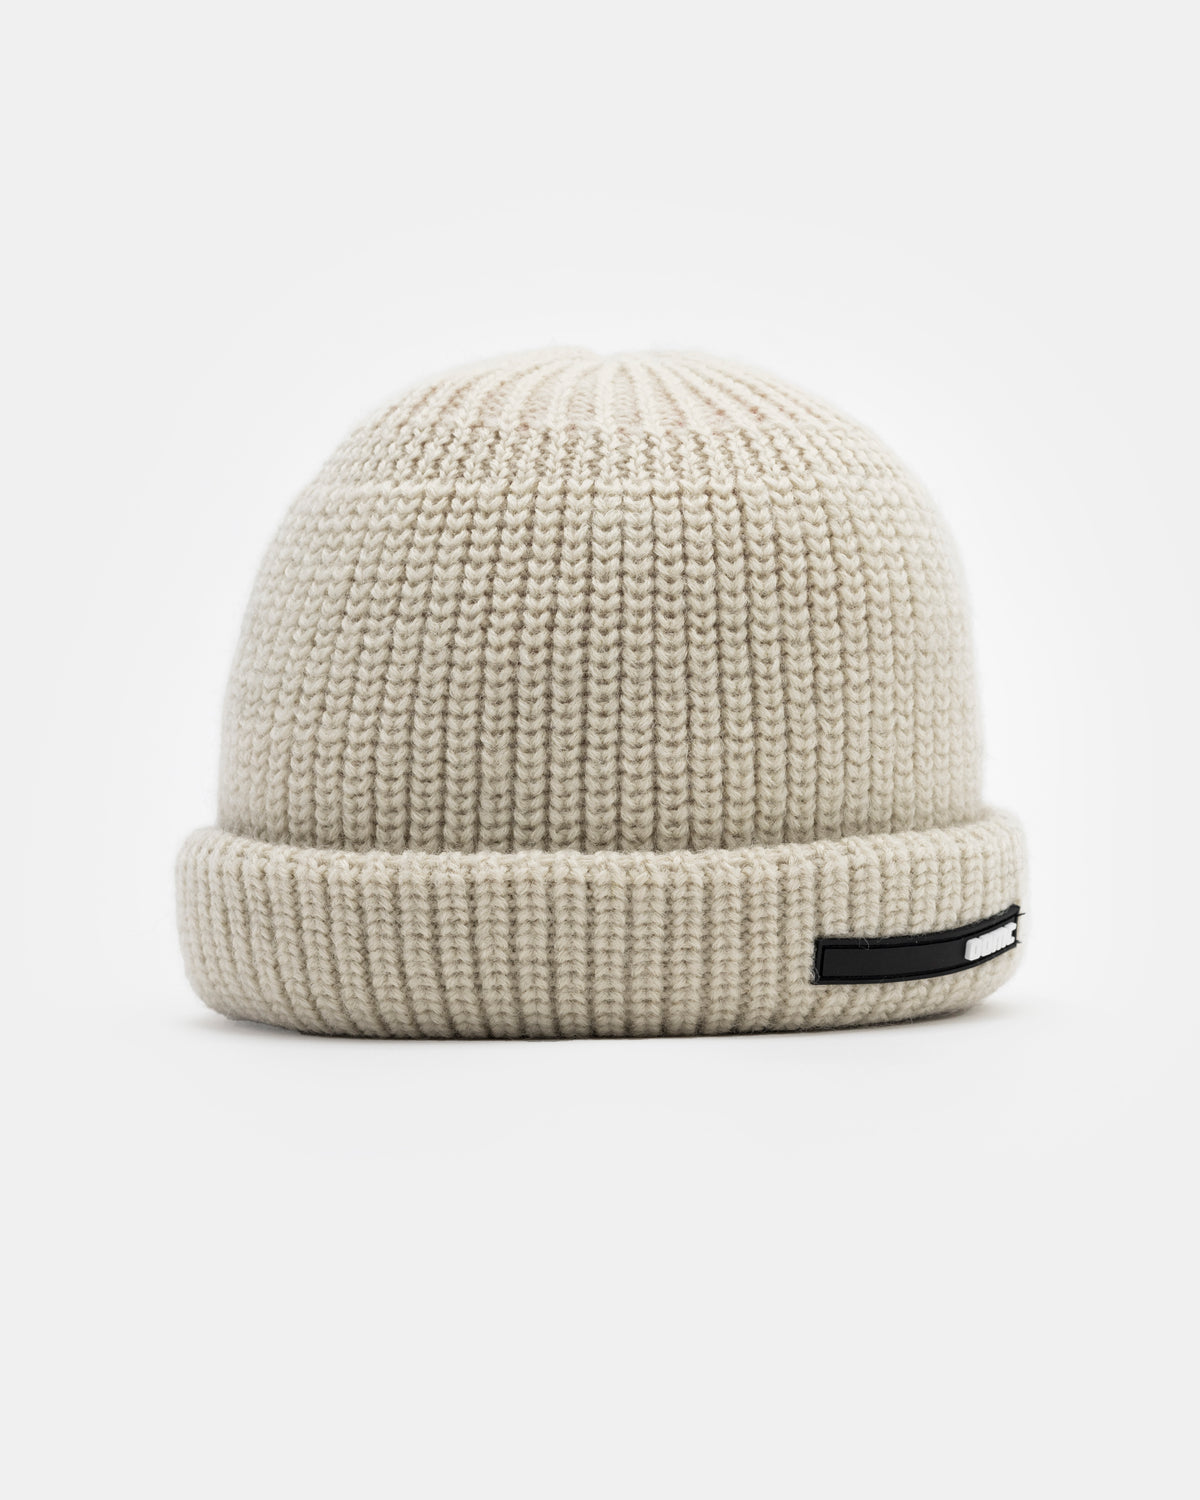 Peak Beanie in Natural White OAMC is the same look but for less